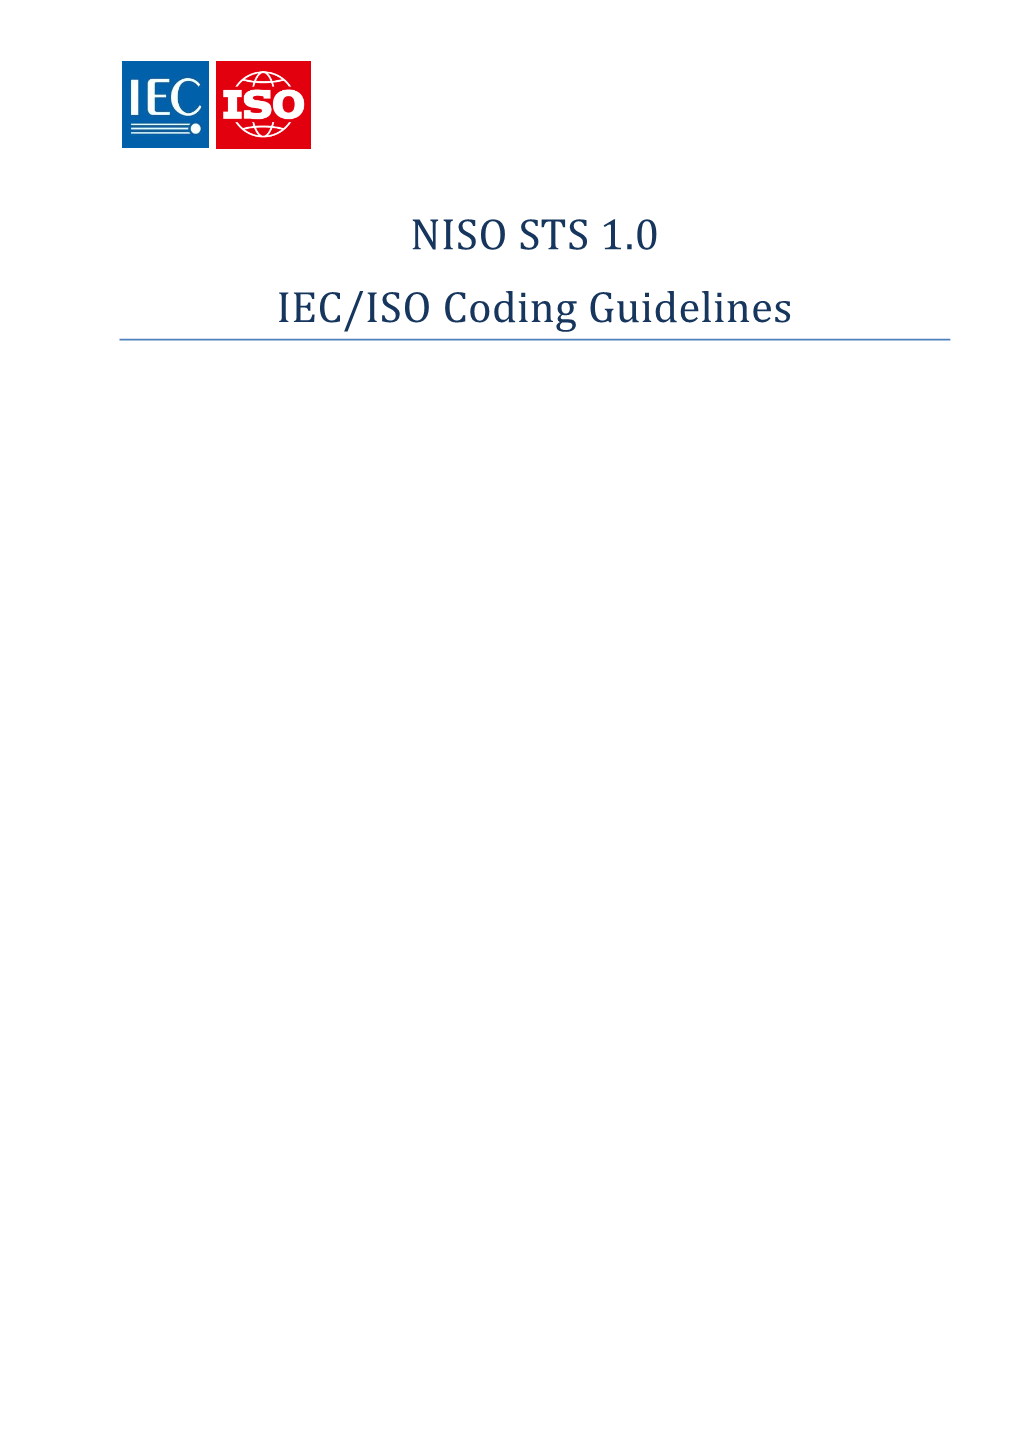 NISO STS 1.0 IEC/ISO Coding Guidelines